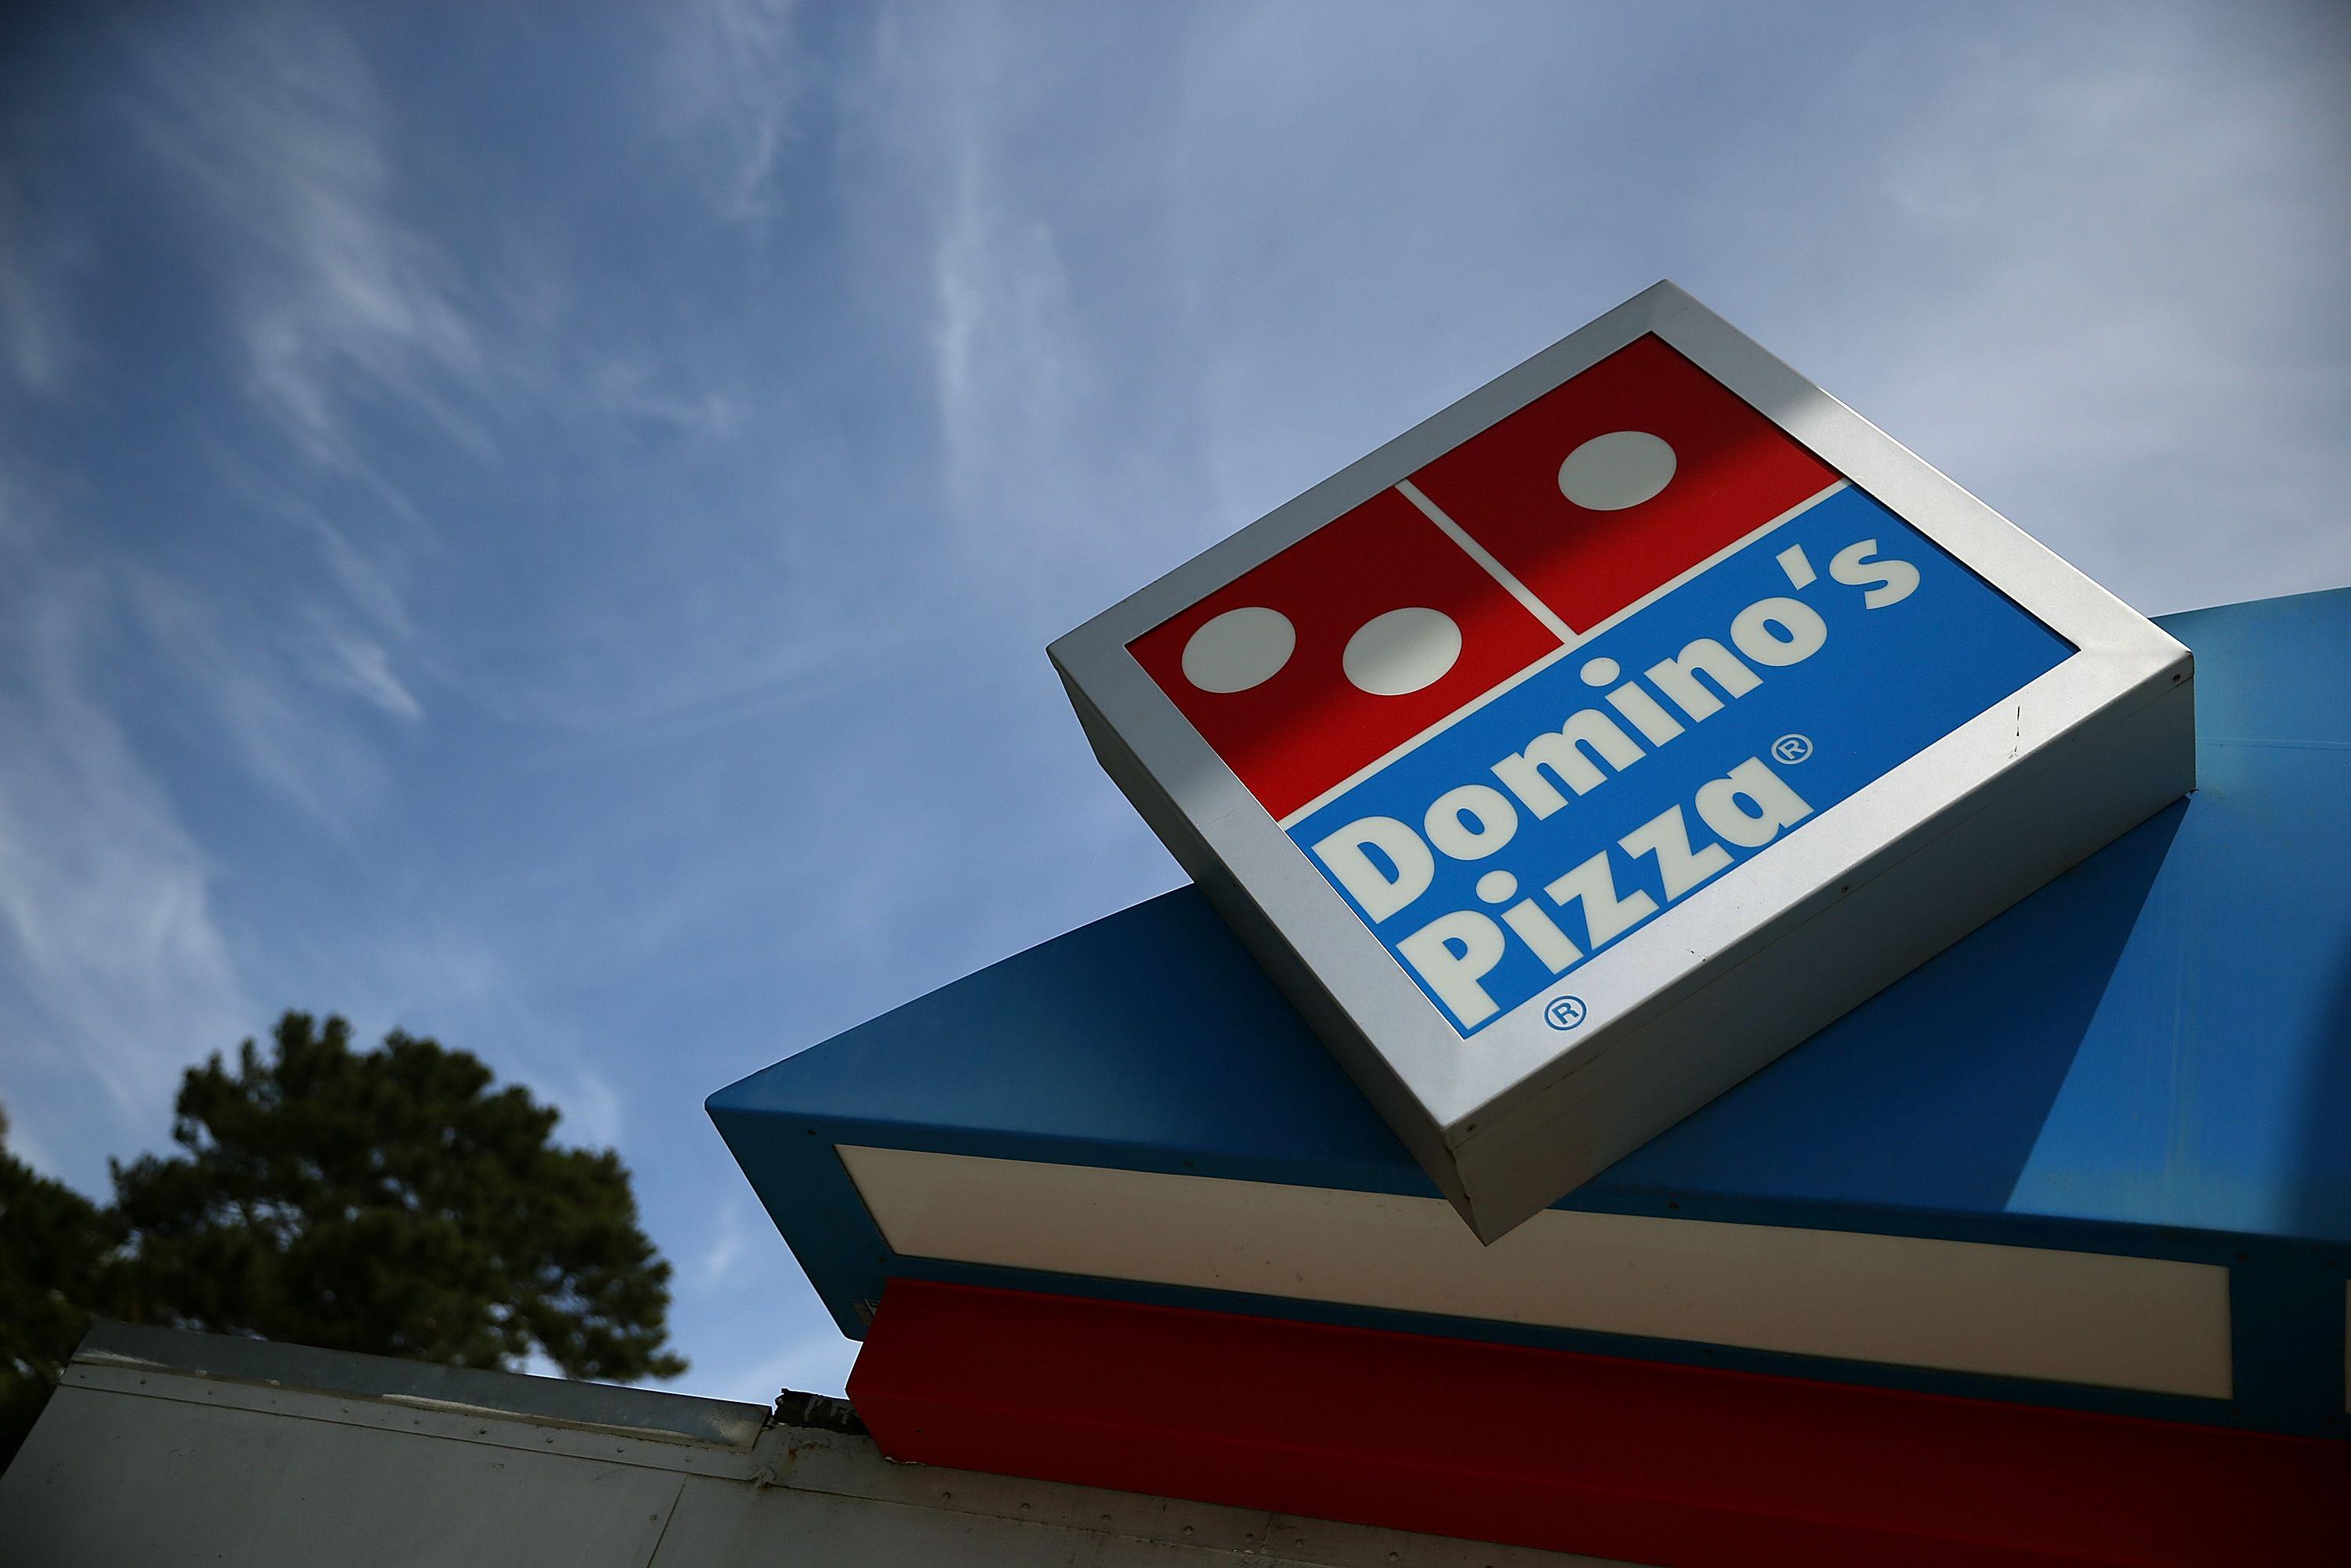 Domino's Logo - Here's Why Domino's Pizza Shares Are on Fire | Fortune